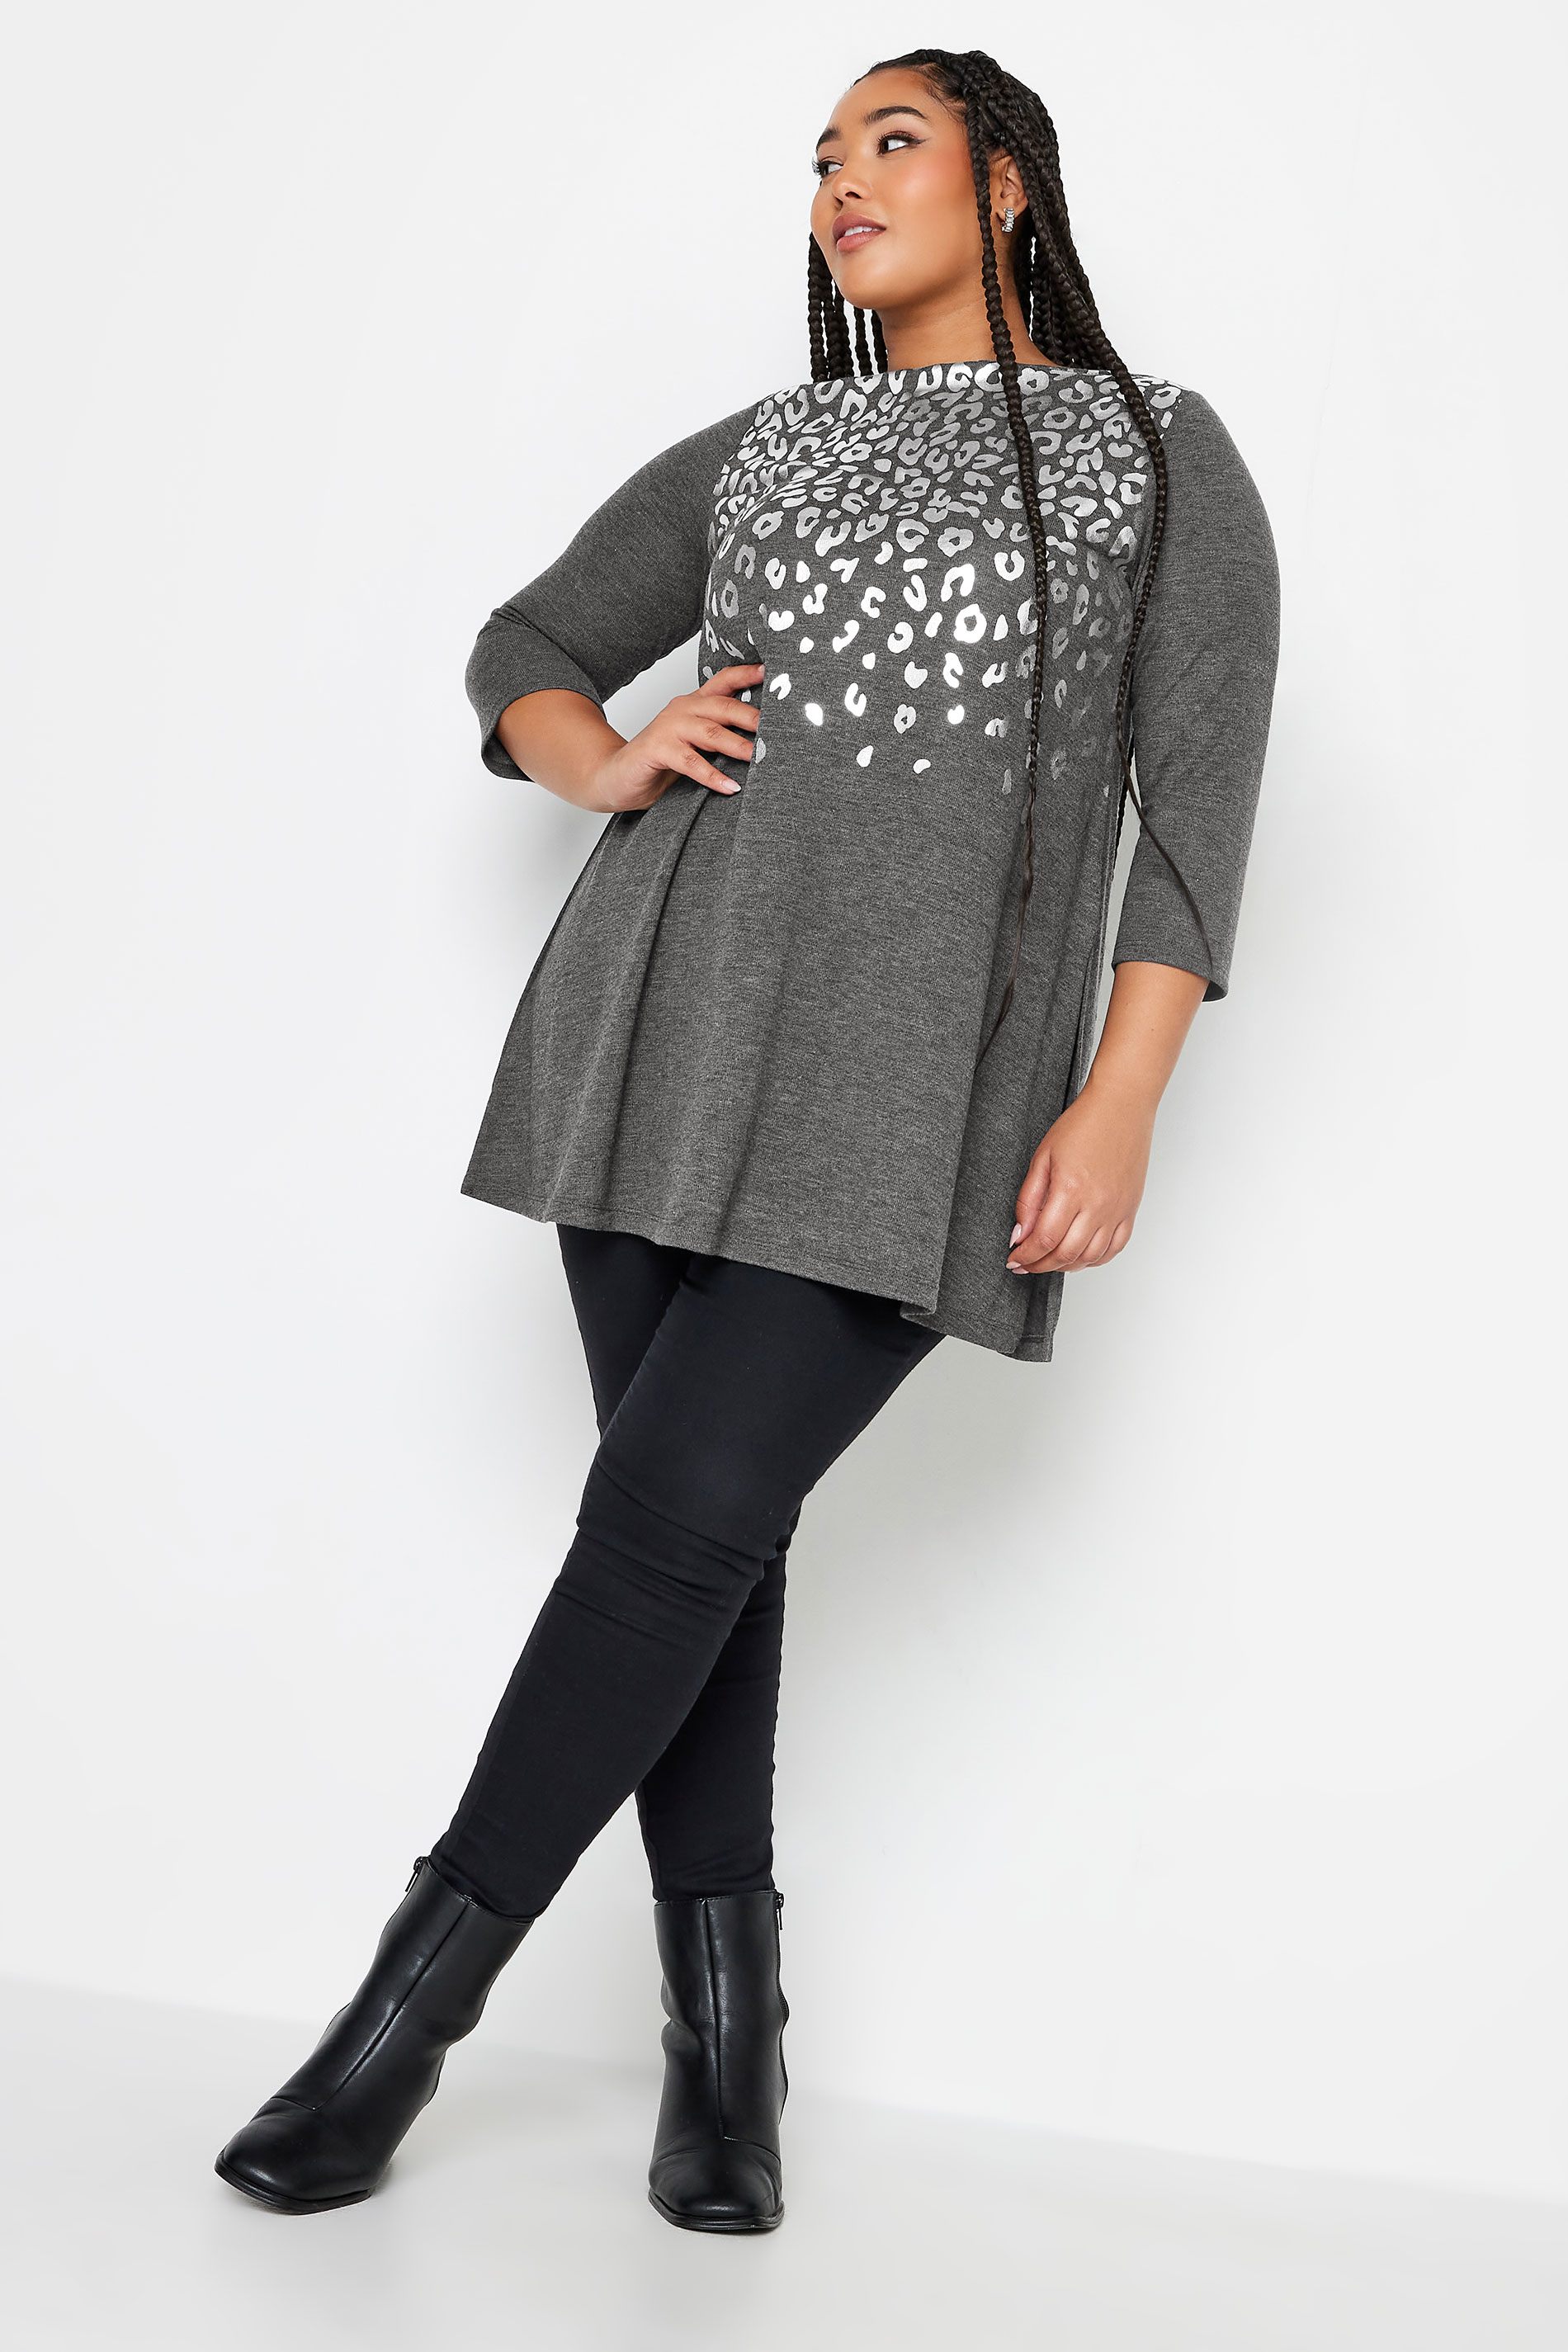 YOURS Plus Size Grey Foil Leopard Print Top | Yours Clothing 2